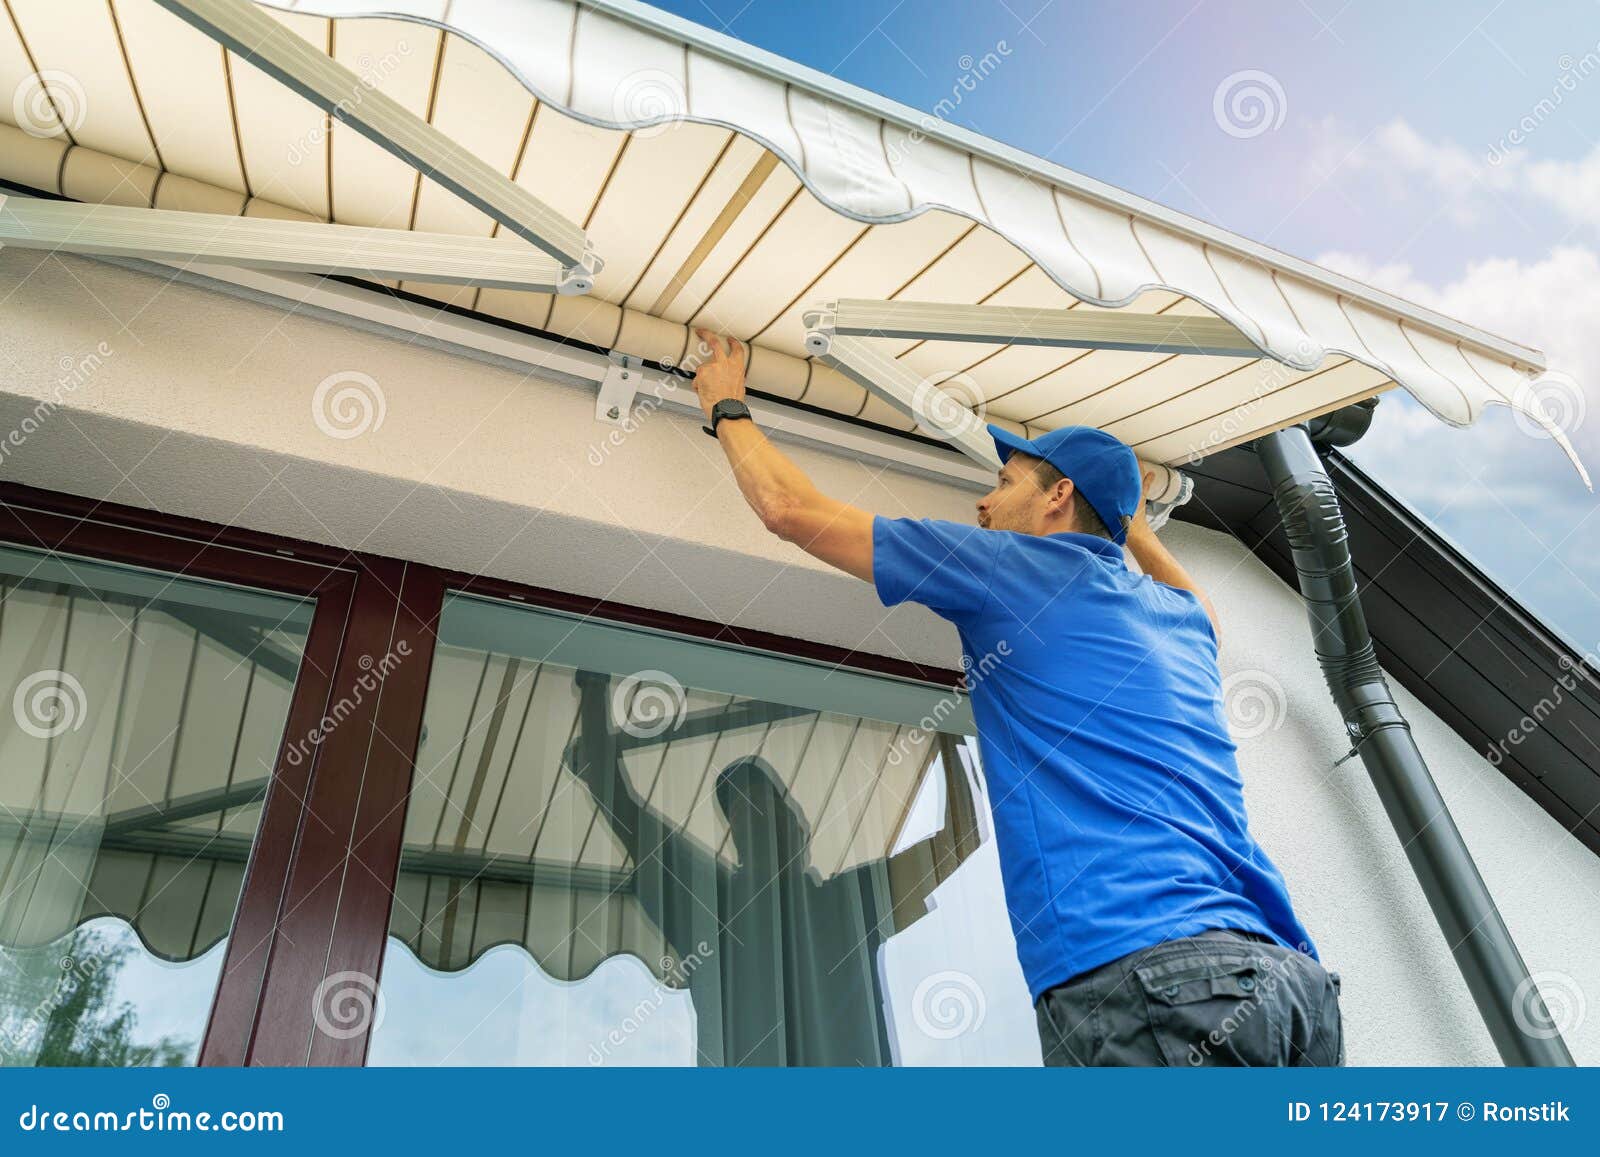 worker install an awning on the house wall over the terrace